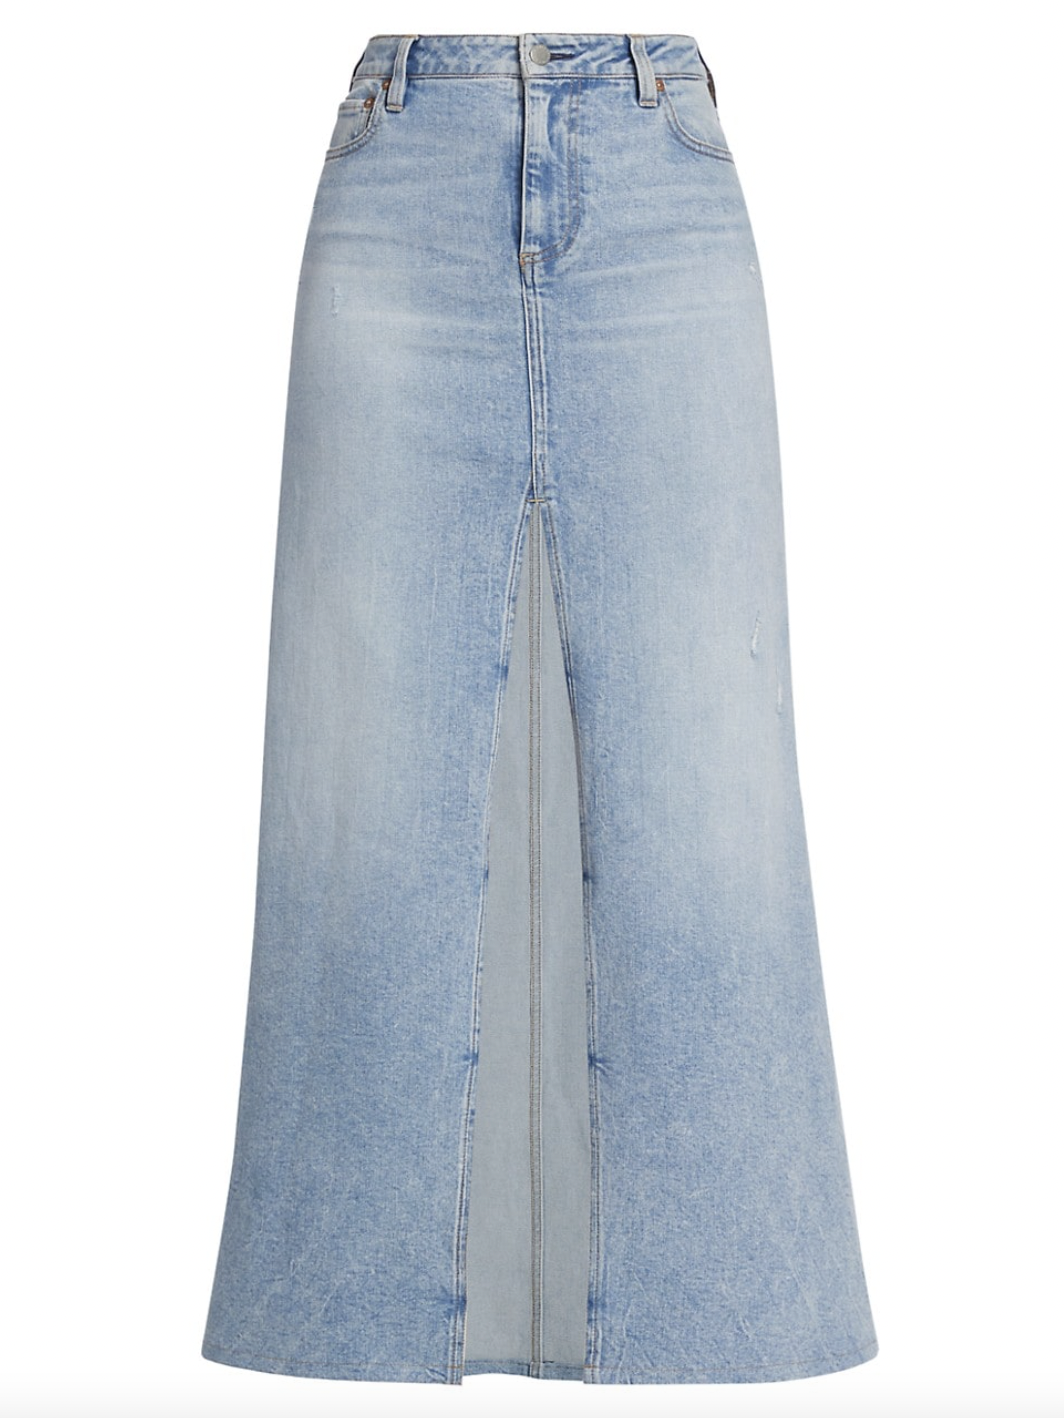 18 Long Denim Skirts to Buy Now - Coveteur: Inside Closets